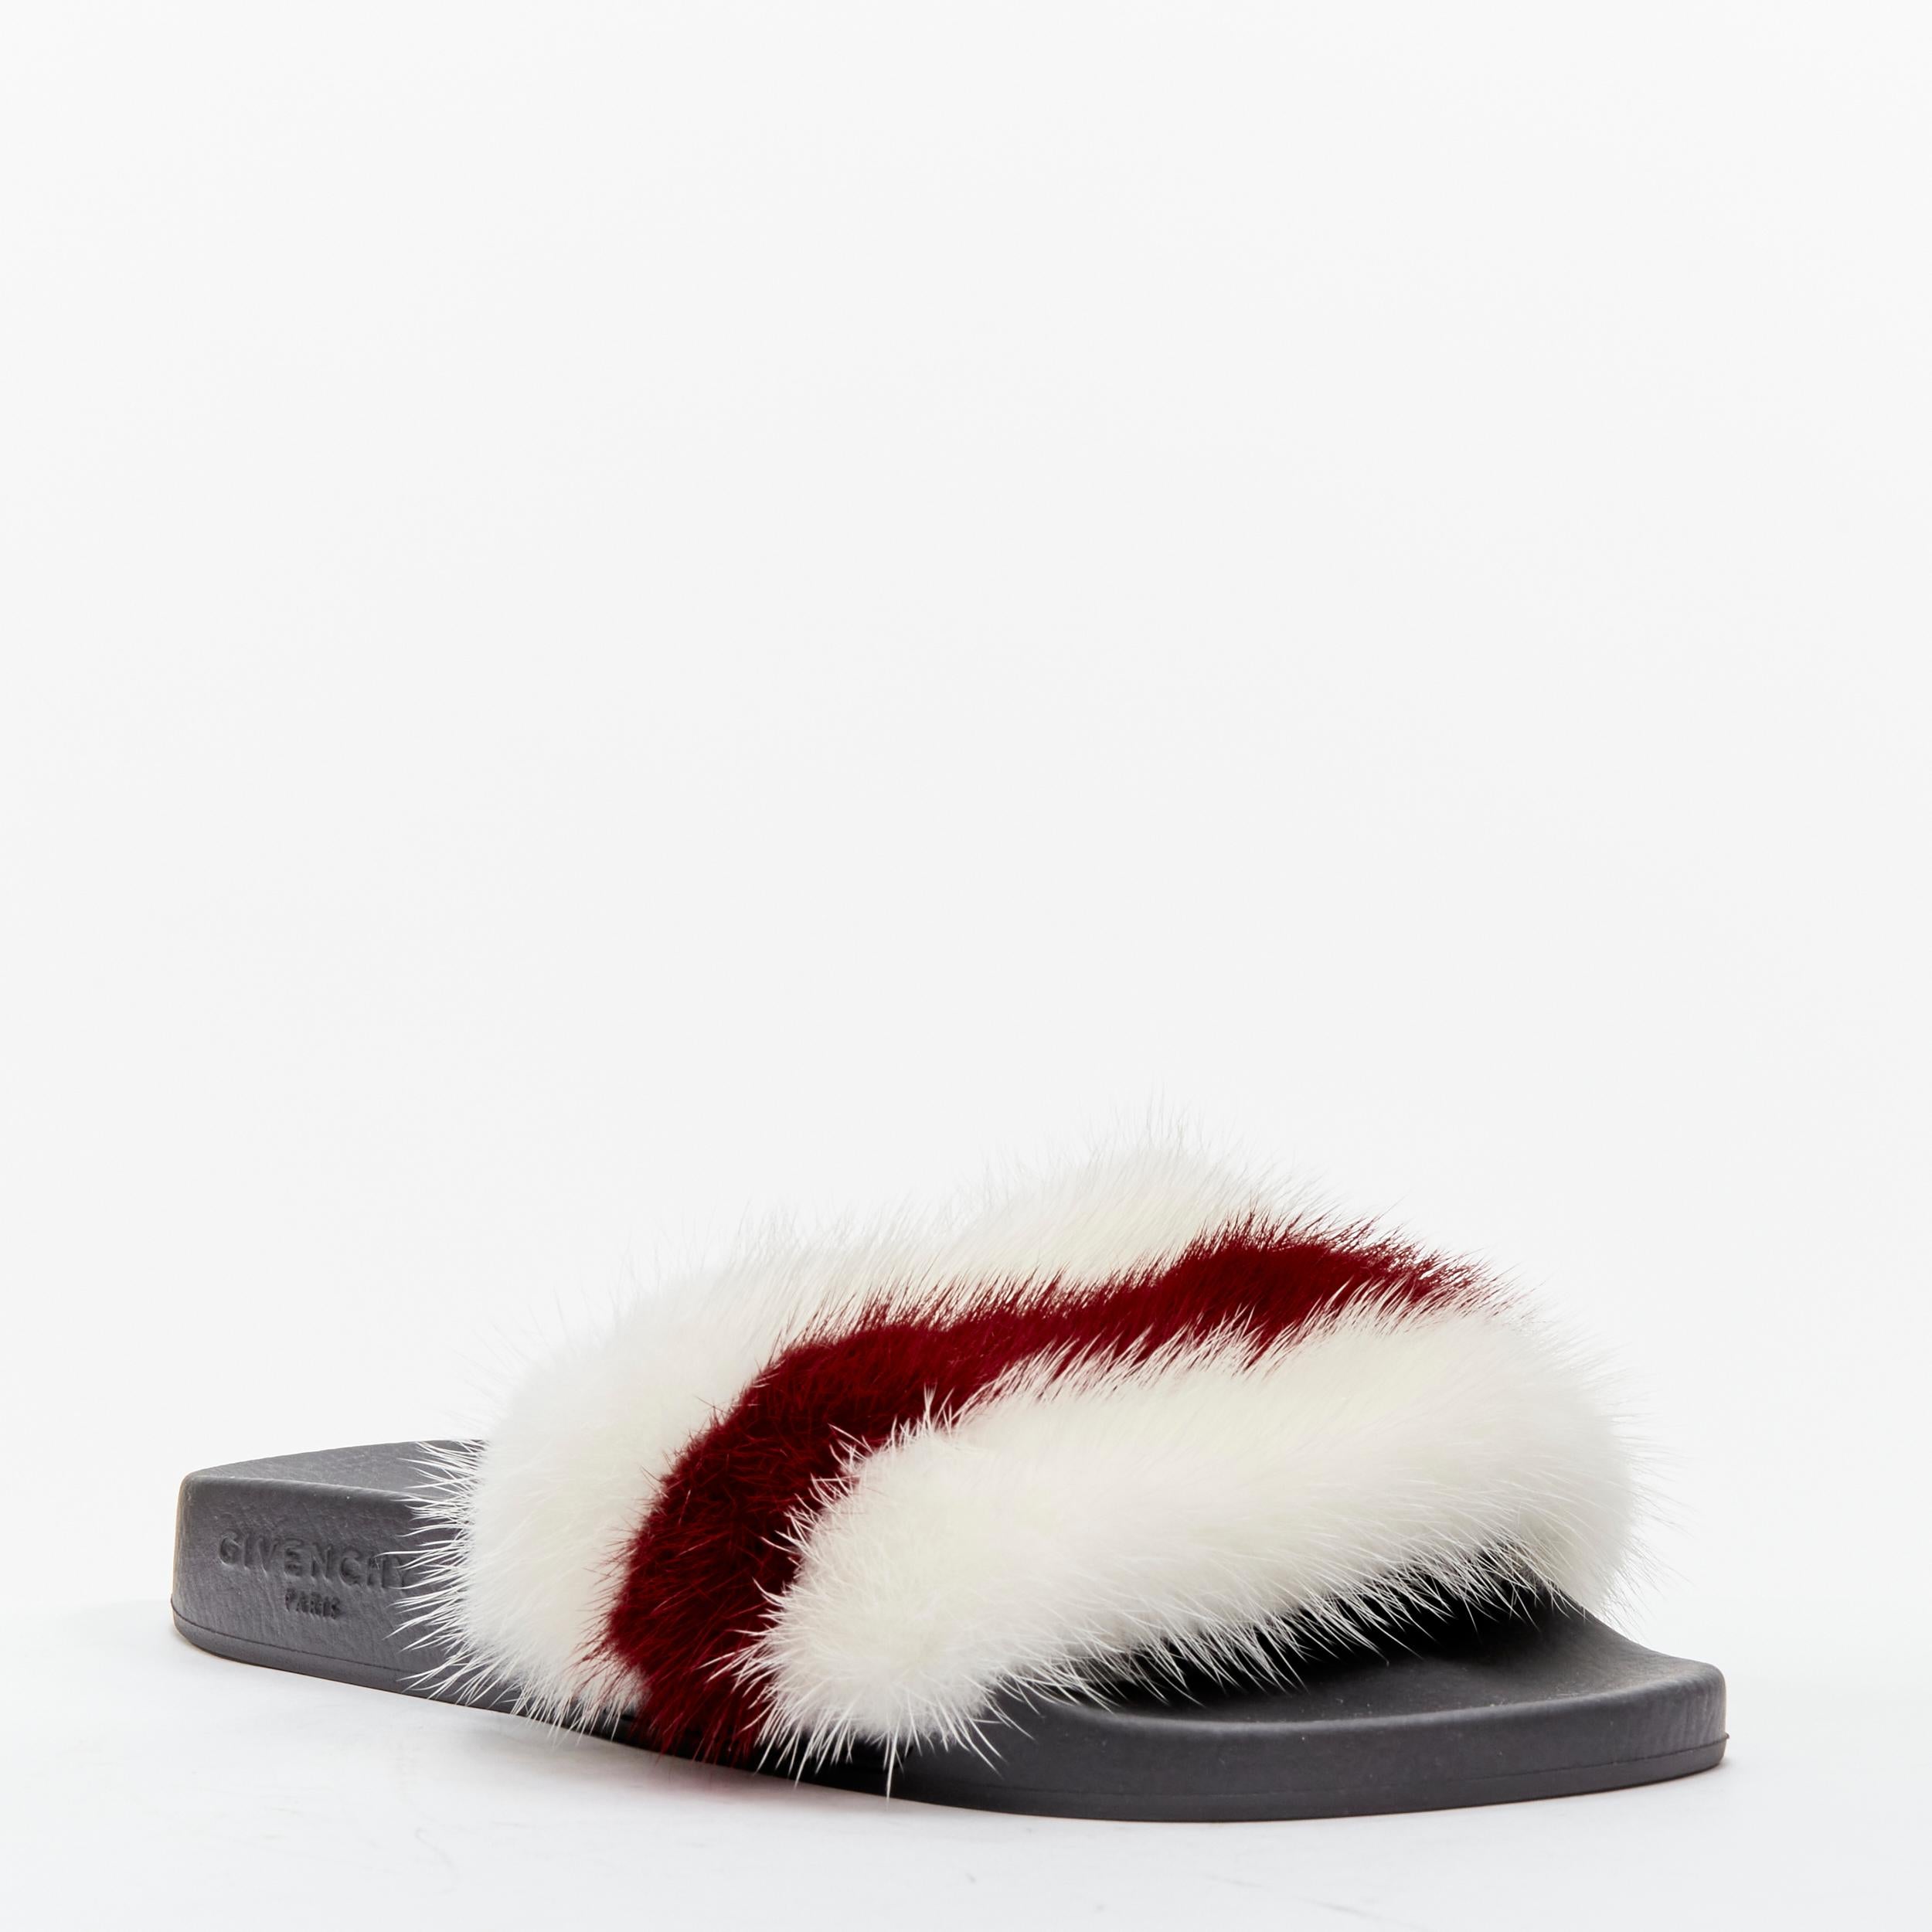 GIVENCHY Tisci fox fur red white stripes debossed logo black pool slides EU38 In Excellent Condition For Sale In Hong Kong, NT